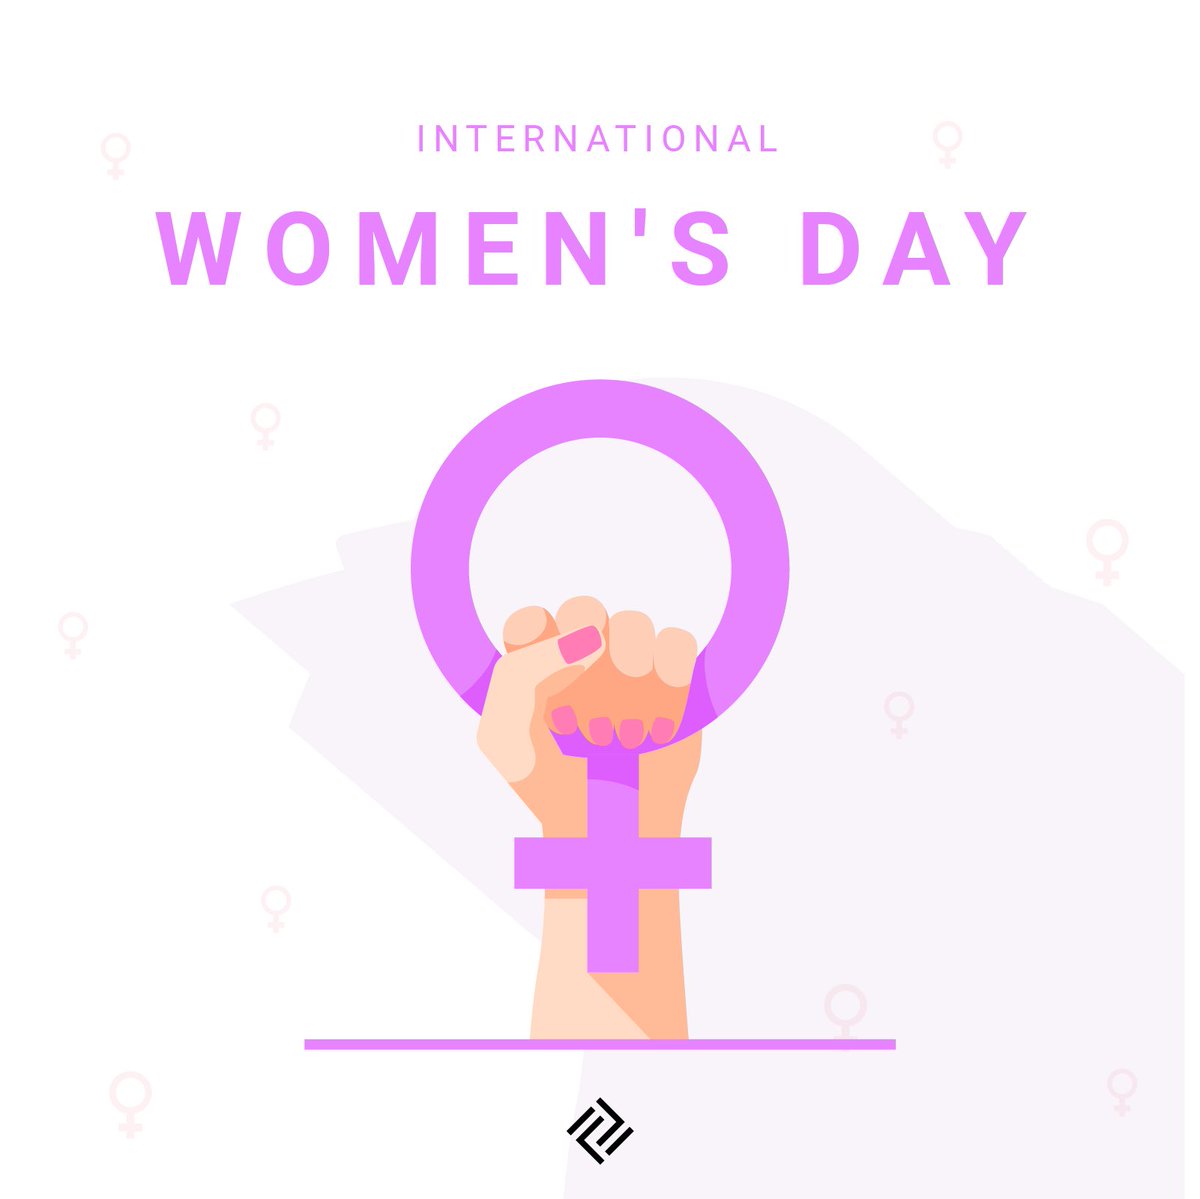 It's March 8! 🙌🌸 Today we celebrate women's achievements, we raise awareness about women's equality and we lobby to accelerate gender parity! #WomenEmpowerment 💪 #effectus #effectussoftware #keeponcoding #womensday #internationalwomensday #womenempowerment #girlpower